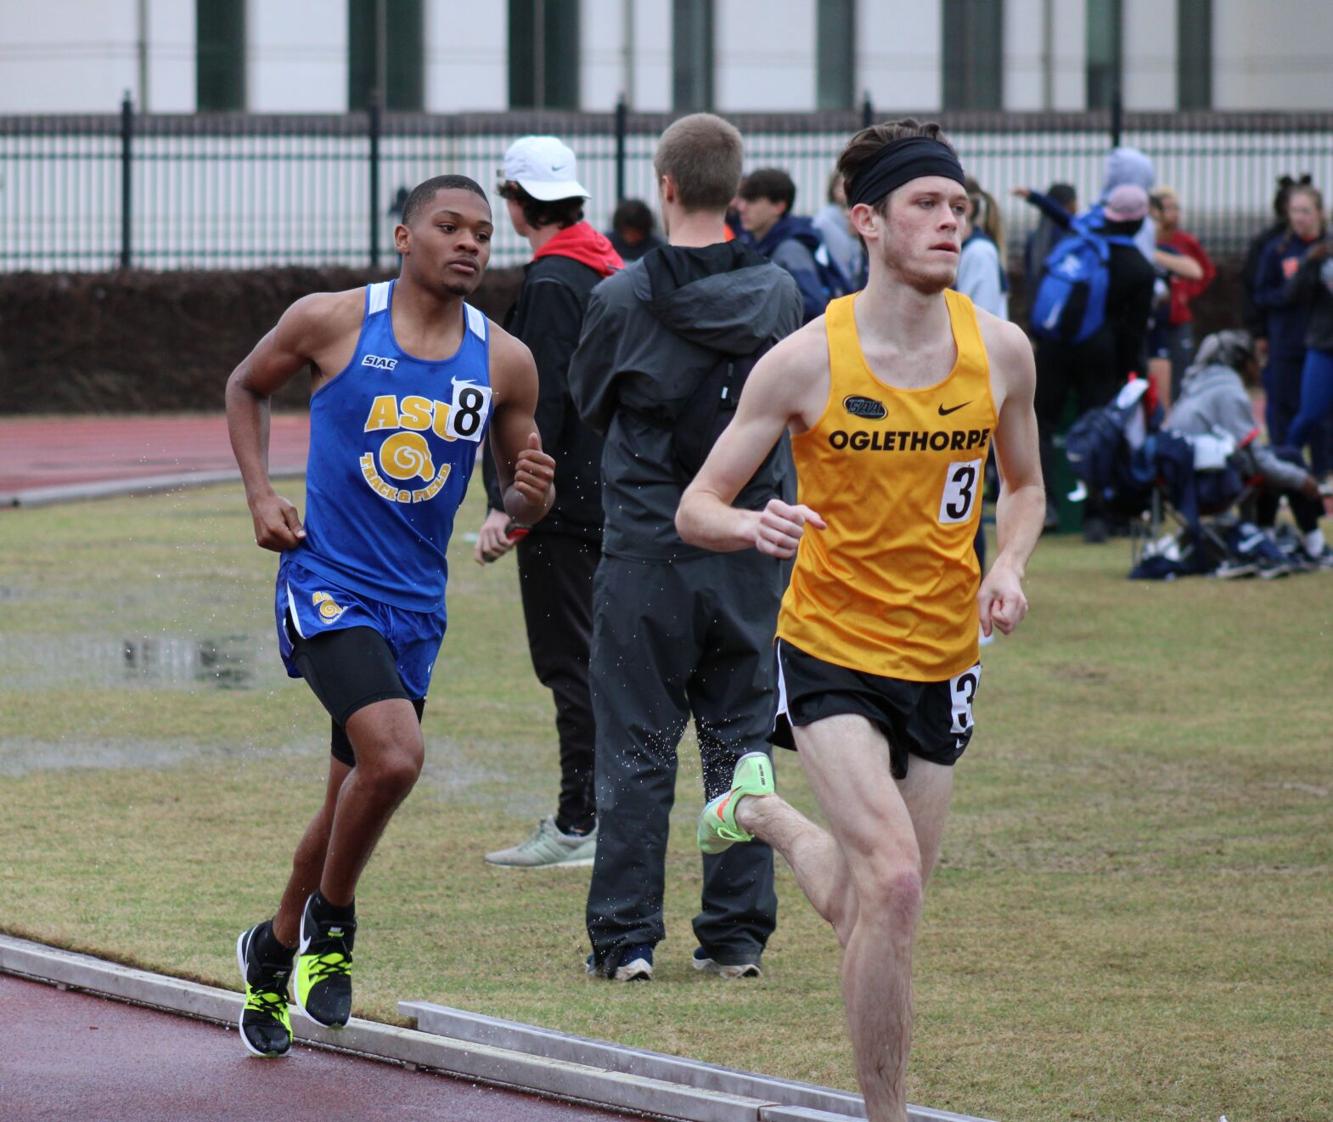 PHOTOS: Albany State Track and Field team competes in the Emory Spring Break Classic 2022